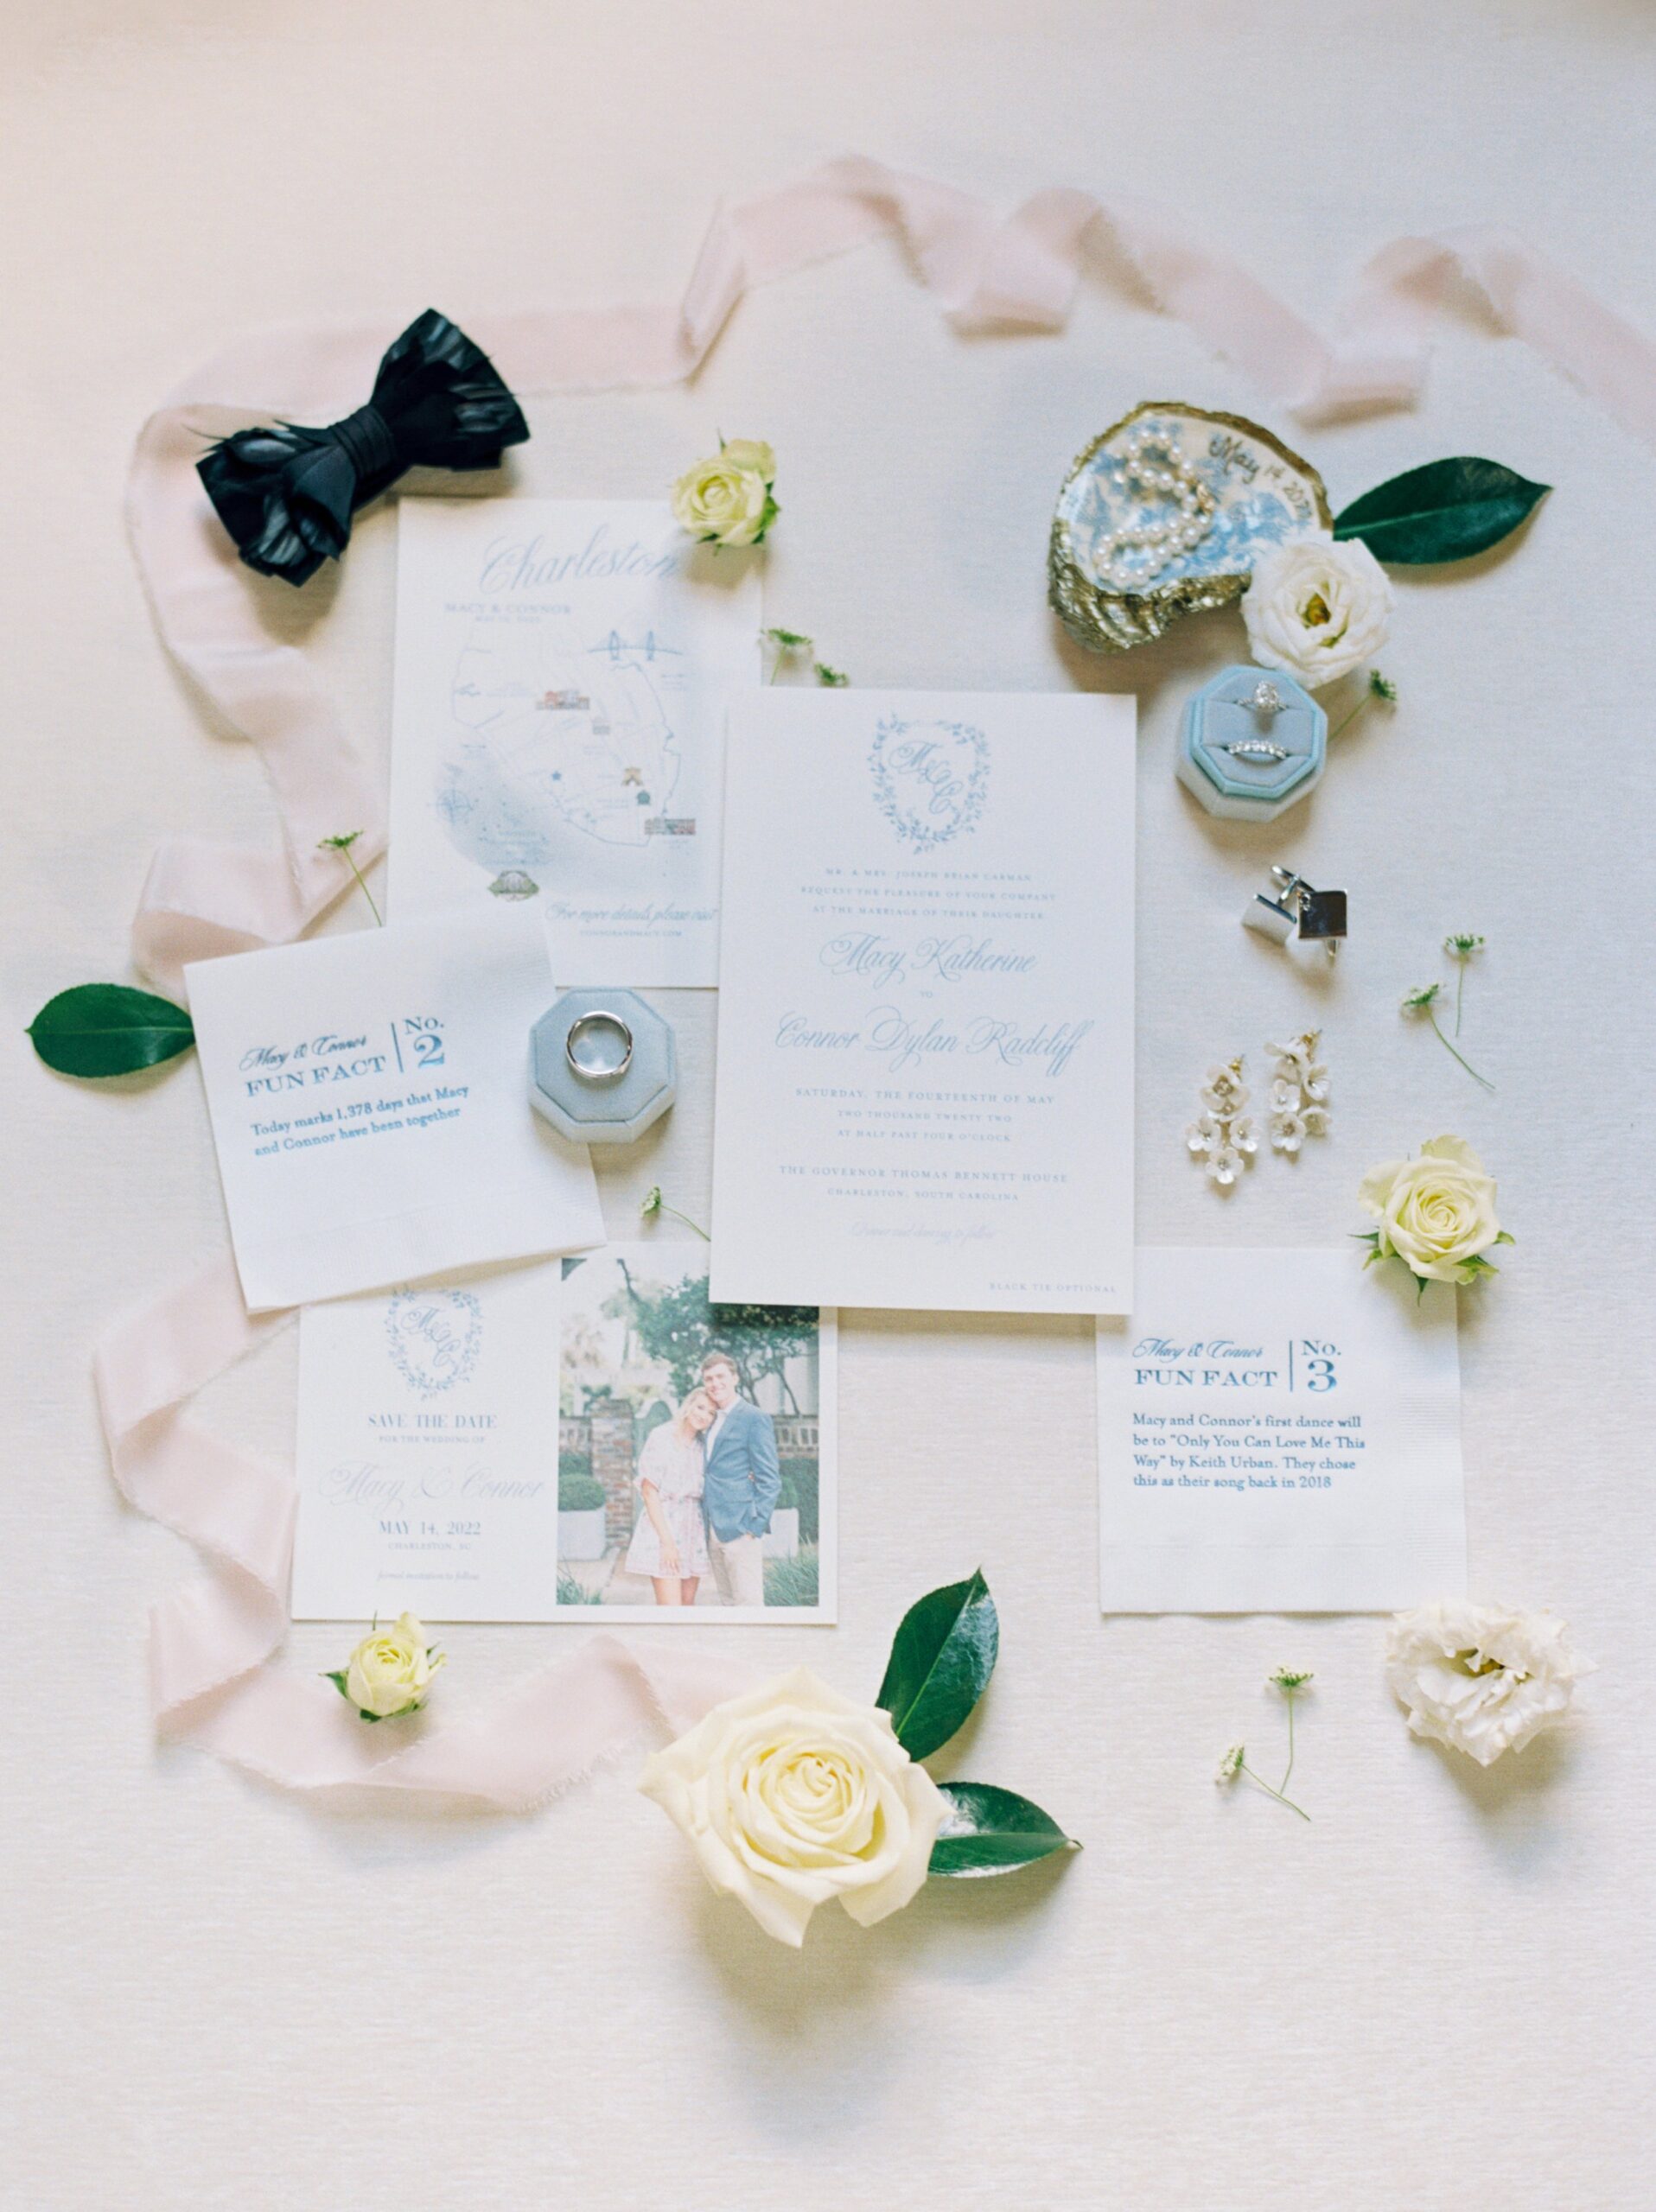 film photography wedding day details. blue and white wedding invitations. light blue ring box. pale pink ribbon. painted oyster shell with pearls.